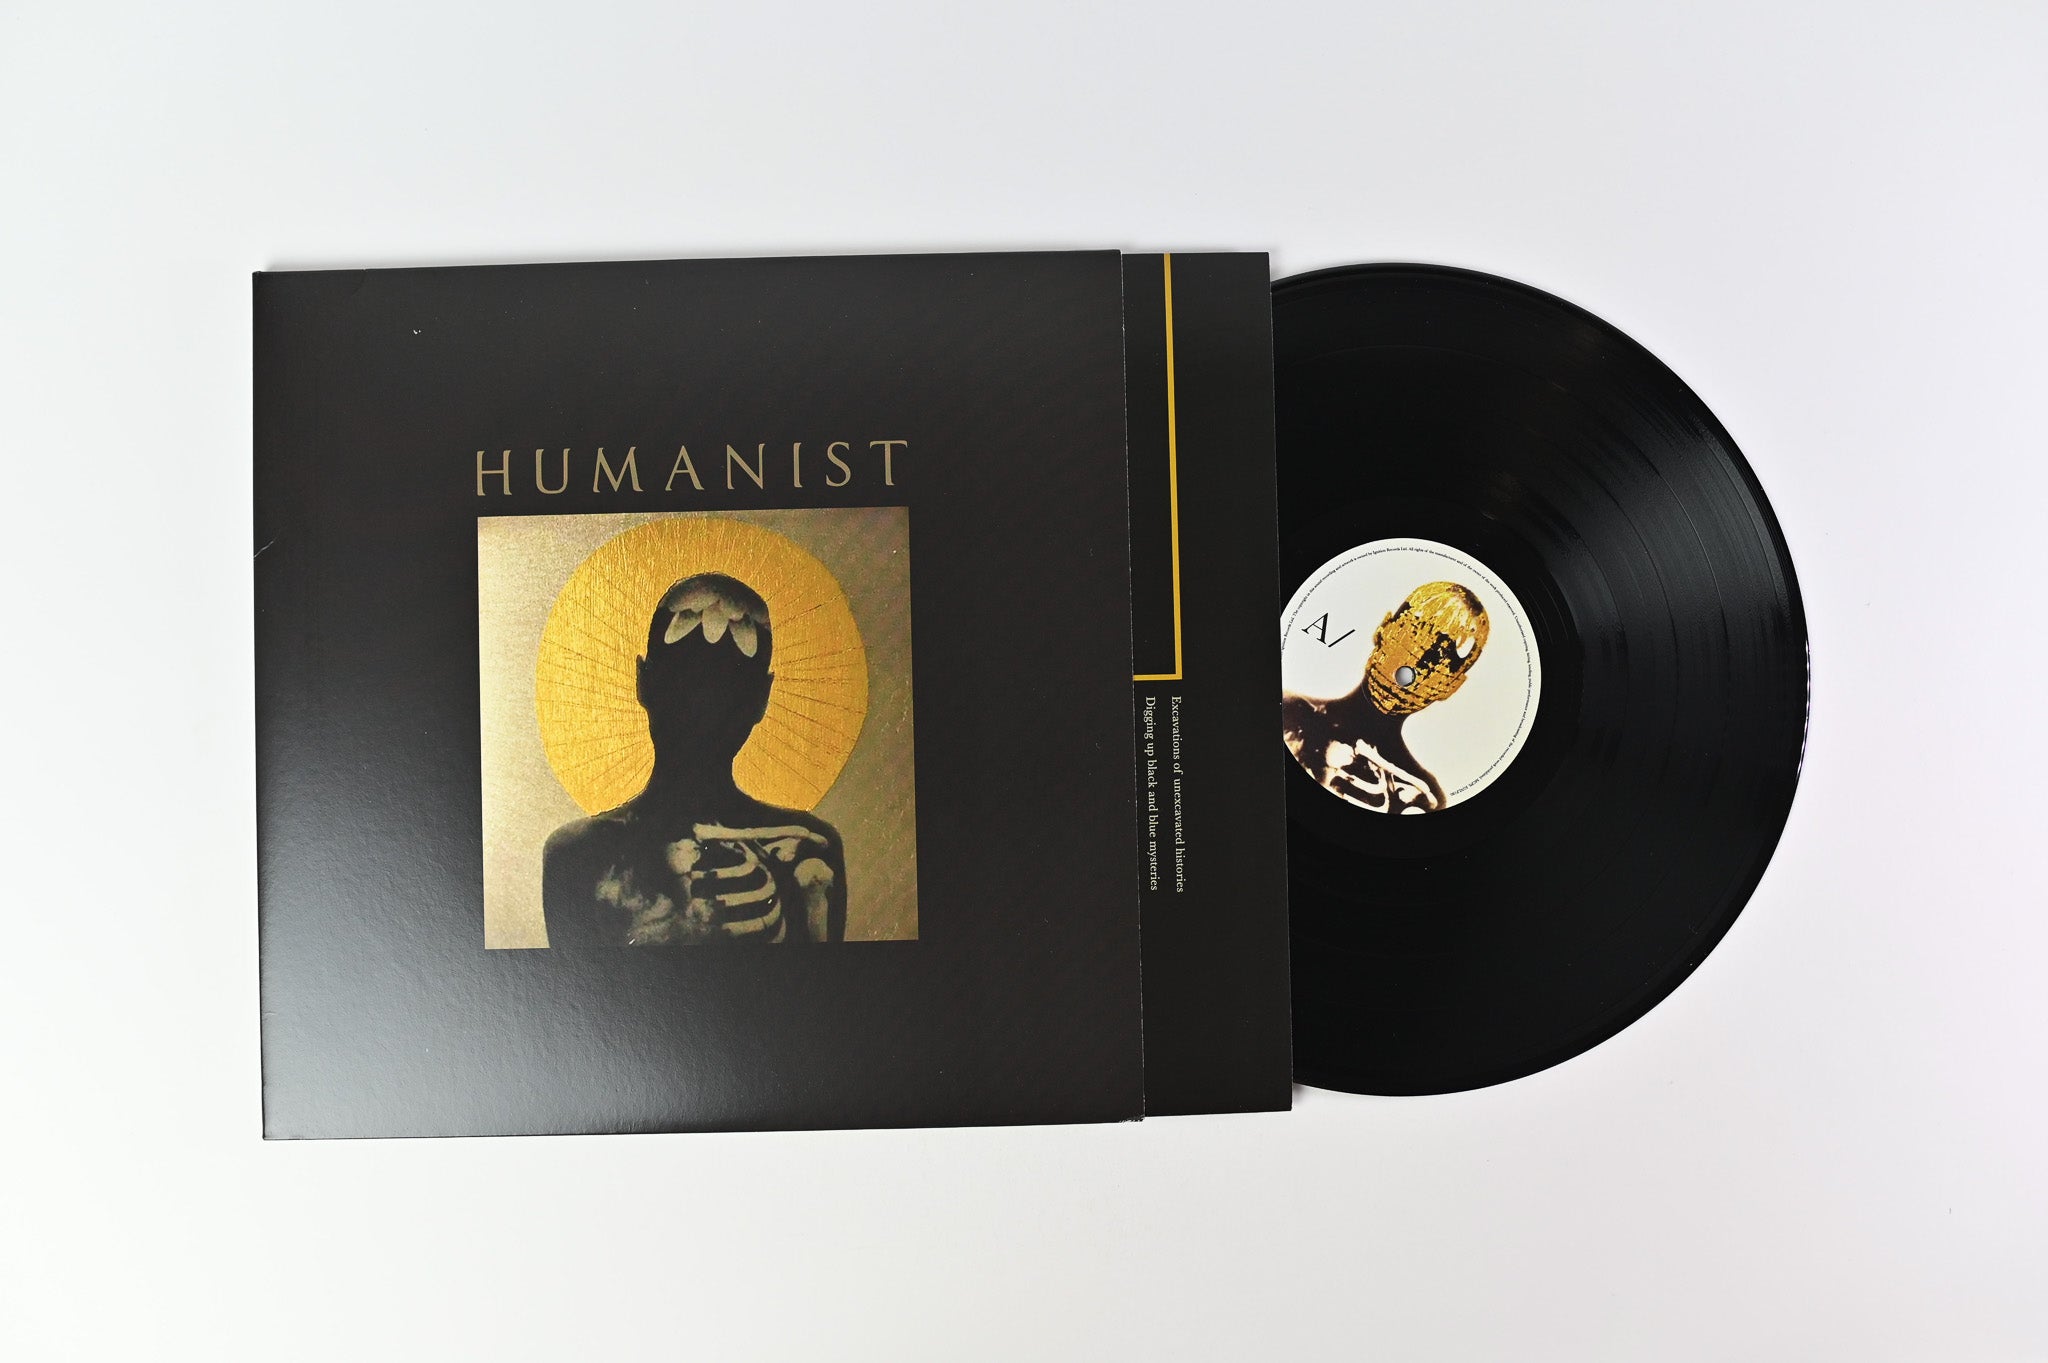 Humanist - Humanist on Ignition Records